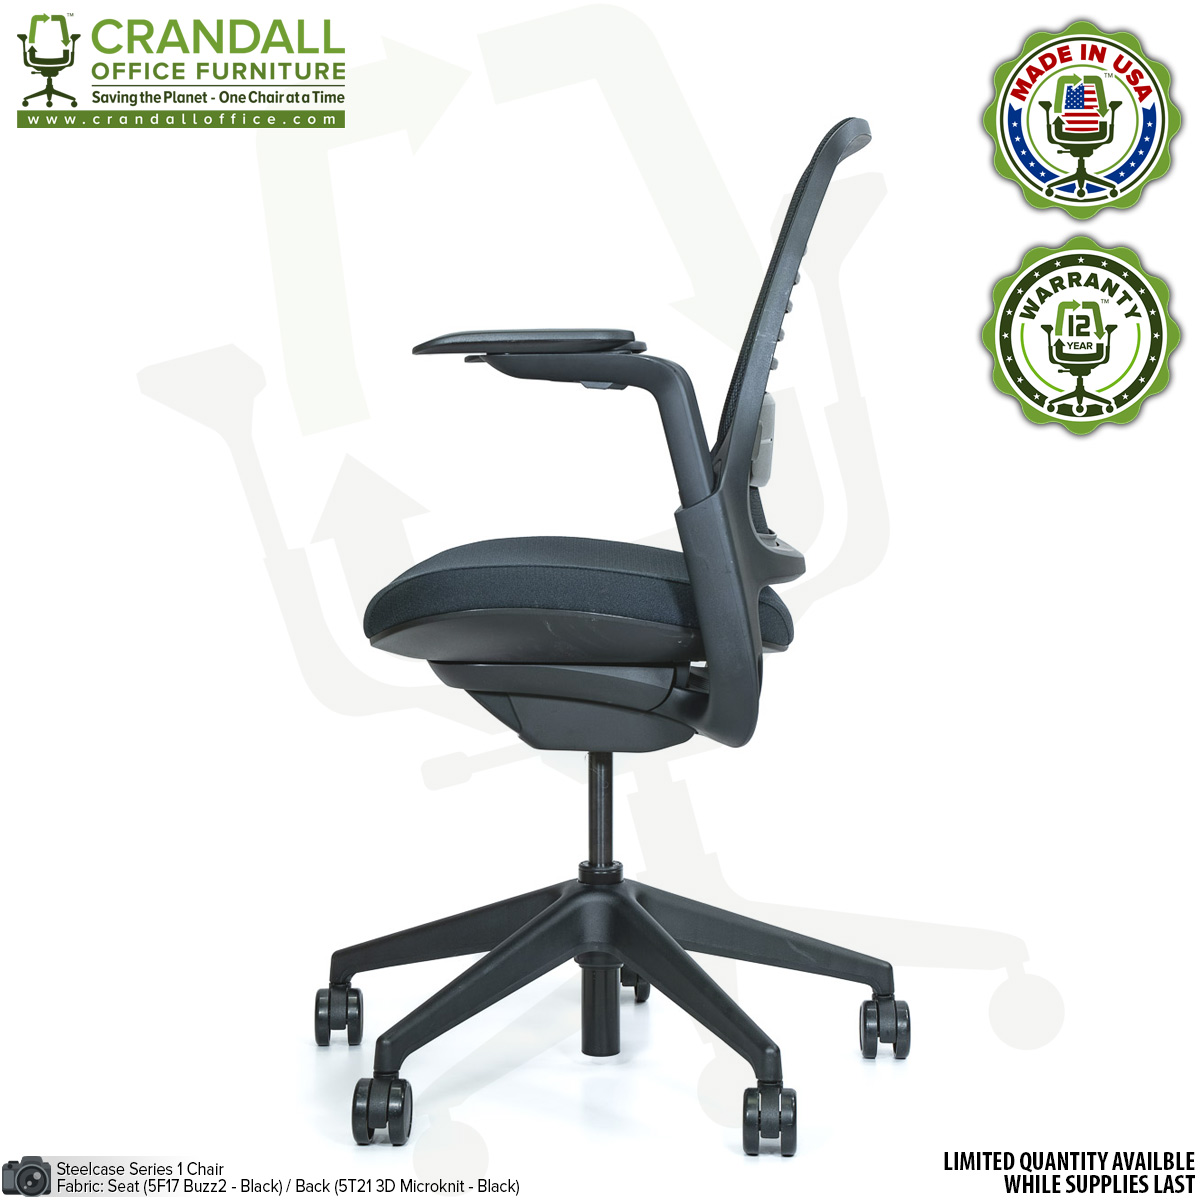 Steelcase Series 1 Chair - Used As-Is - Crandall Office Furniture